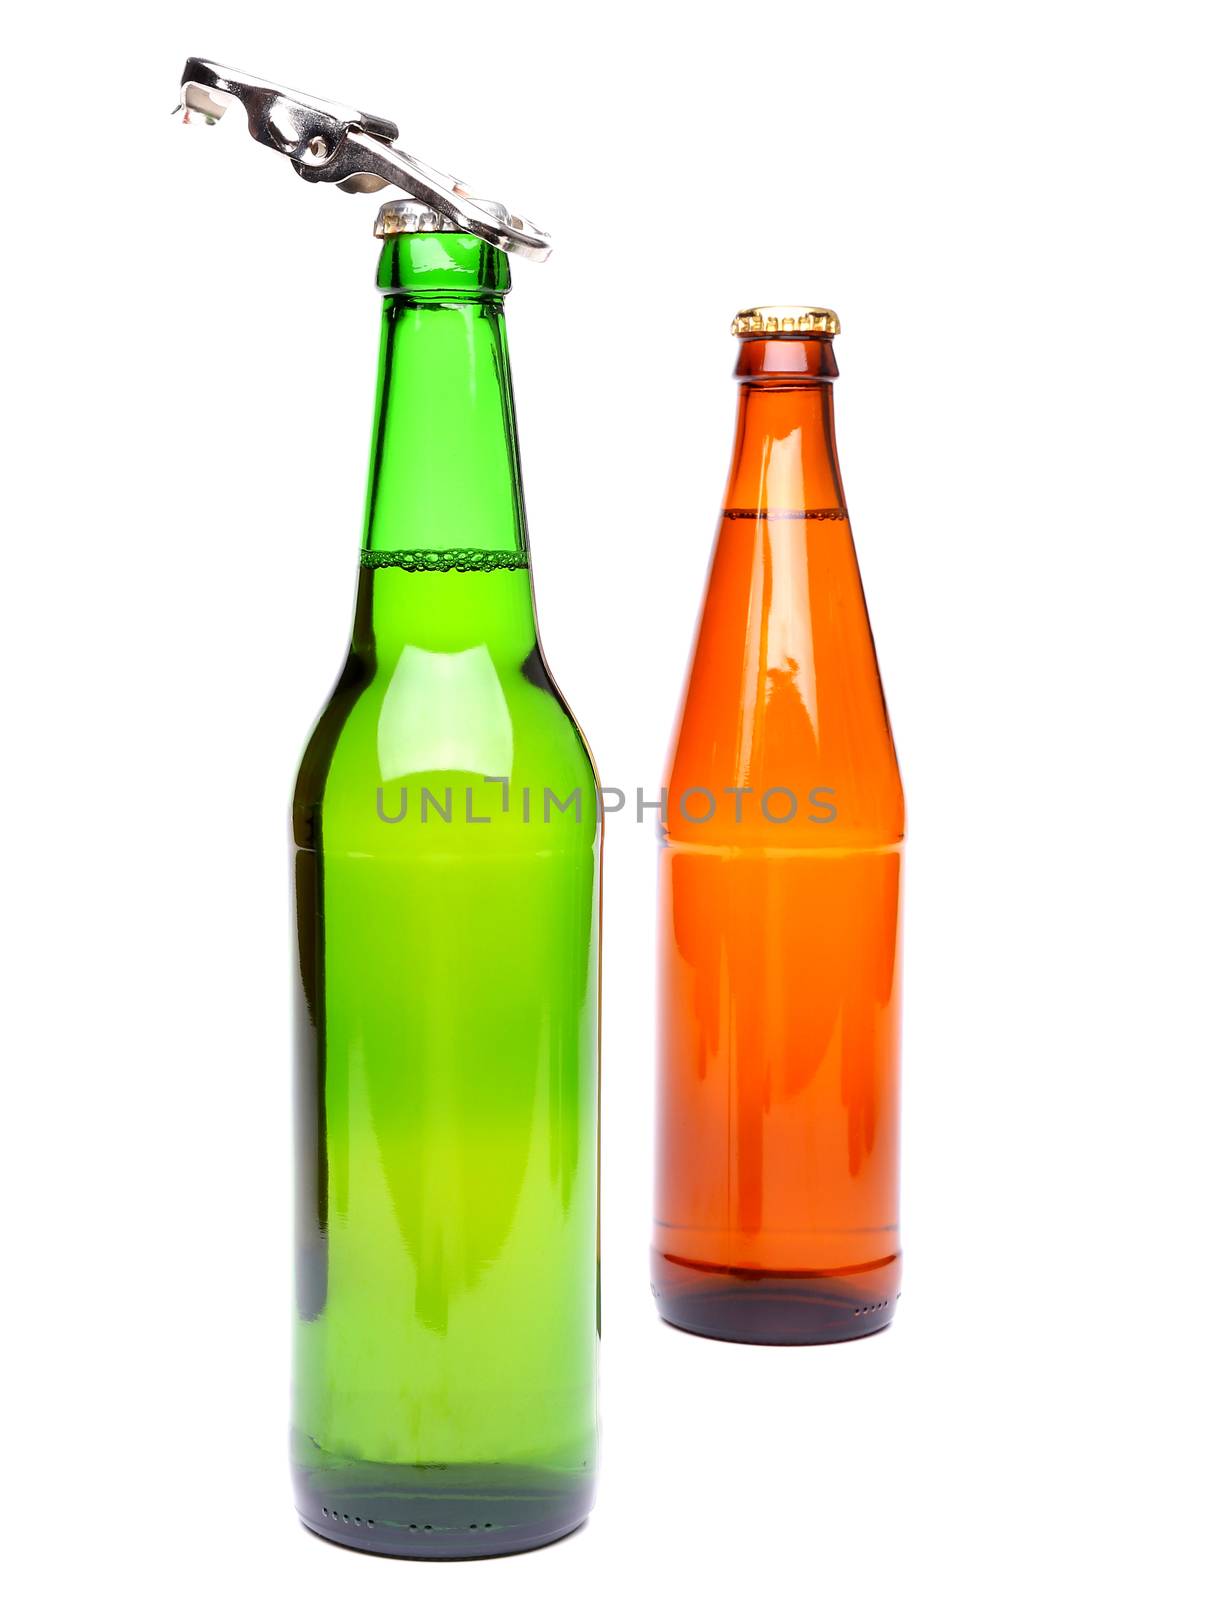 Two bottles of beer and a opener on the white background.